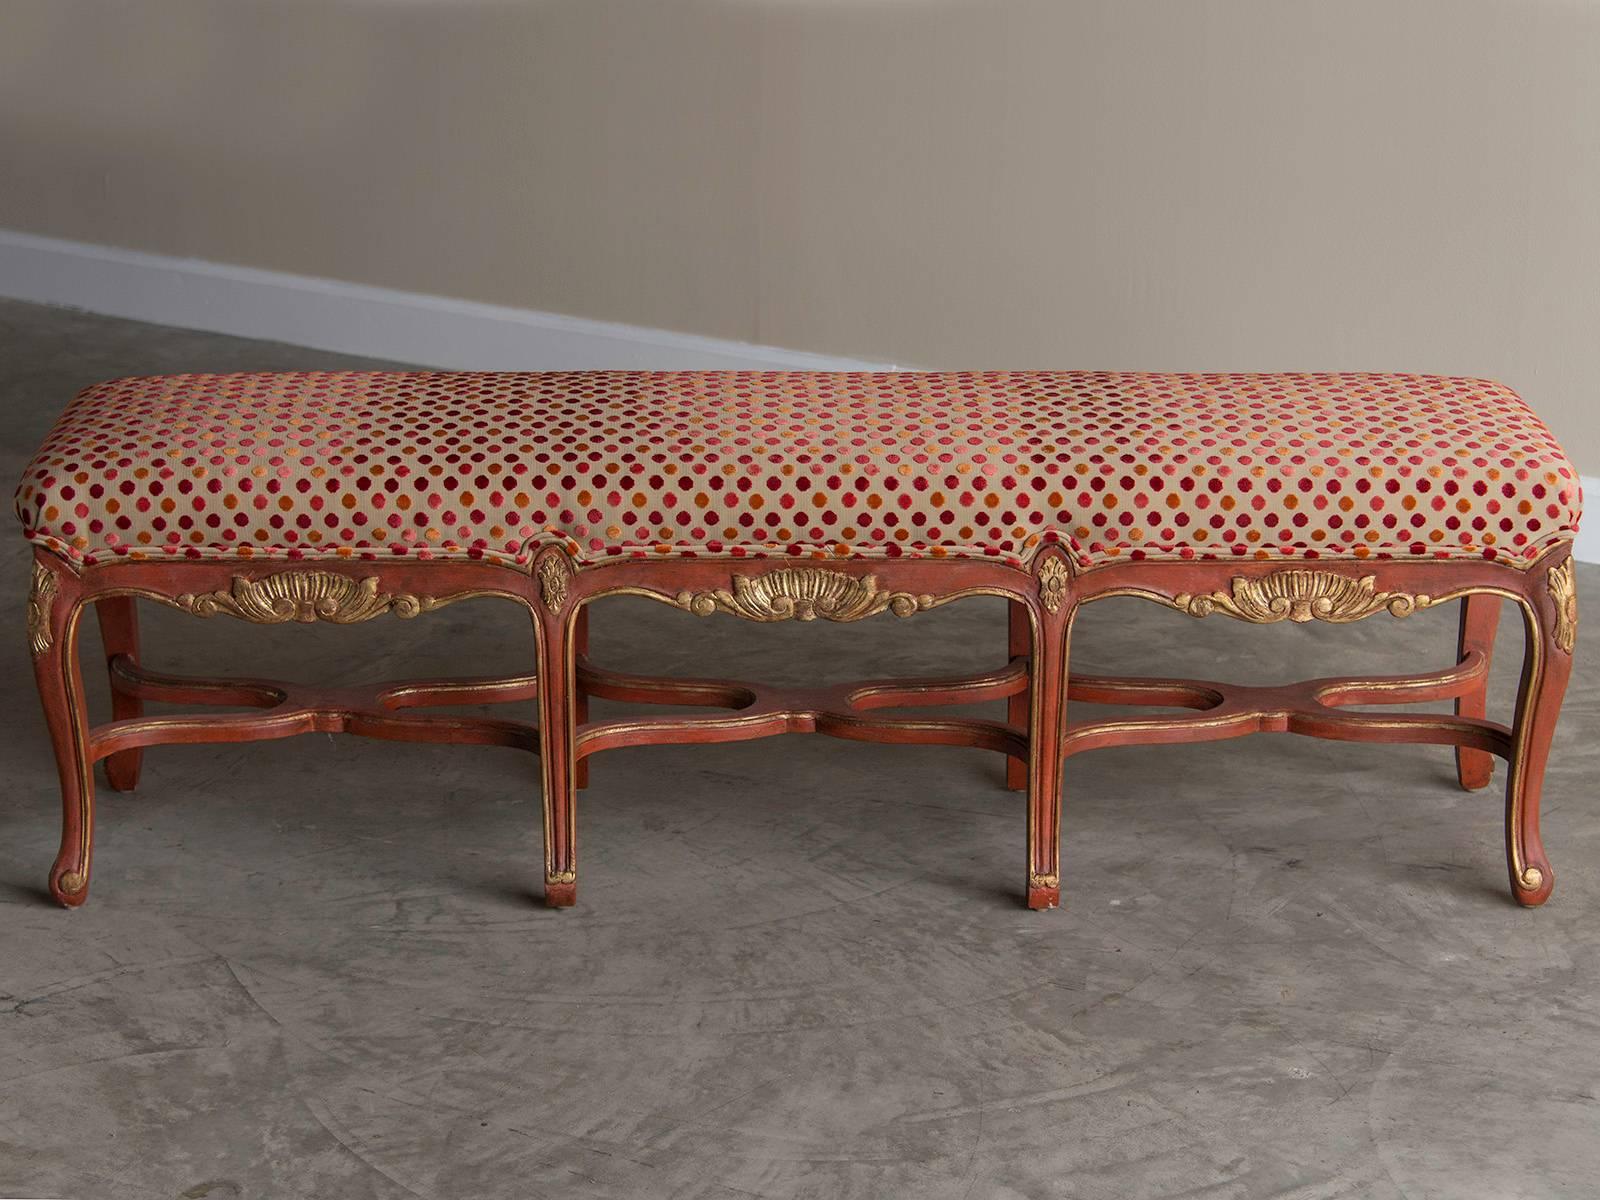 Régence French Regence Style Painted Bench, Eight Cabriole Legs with Stretchers